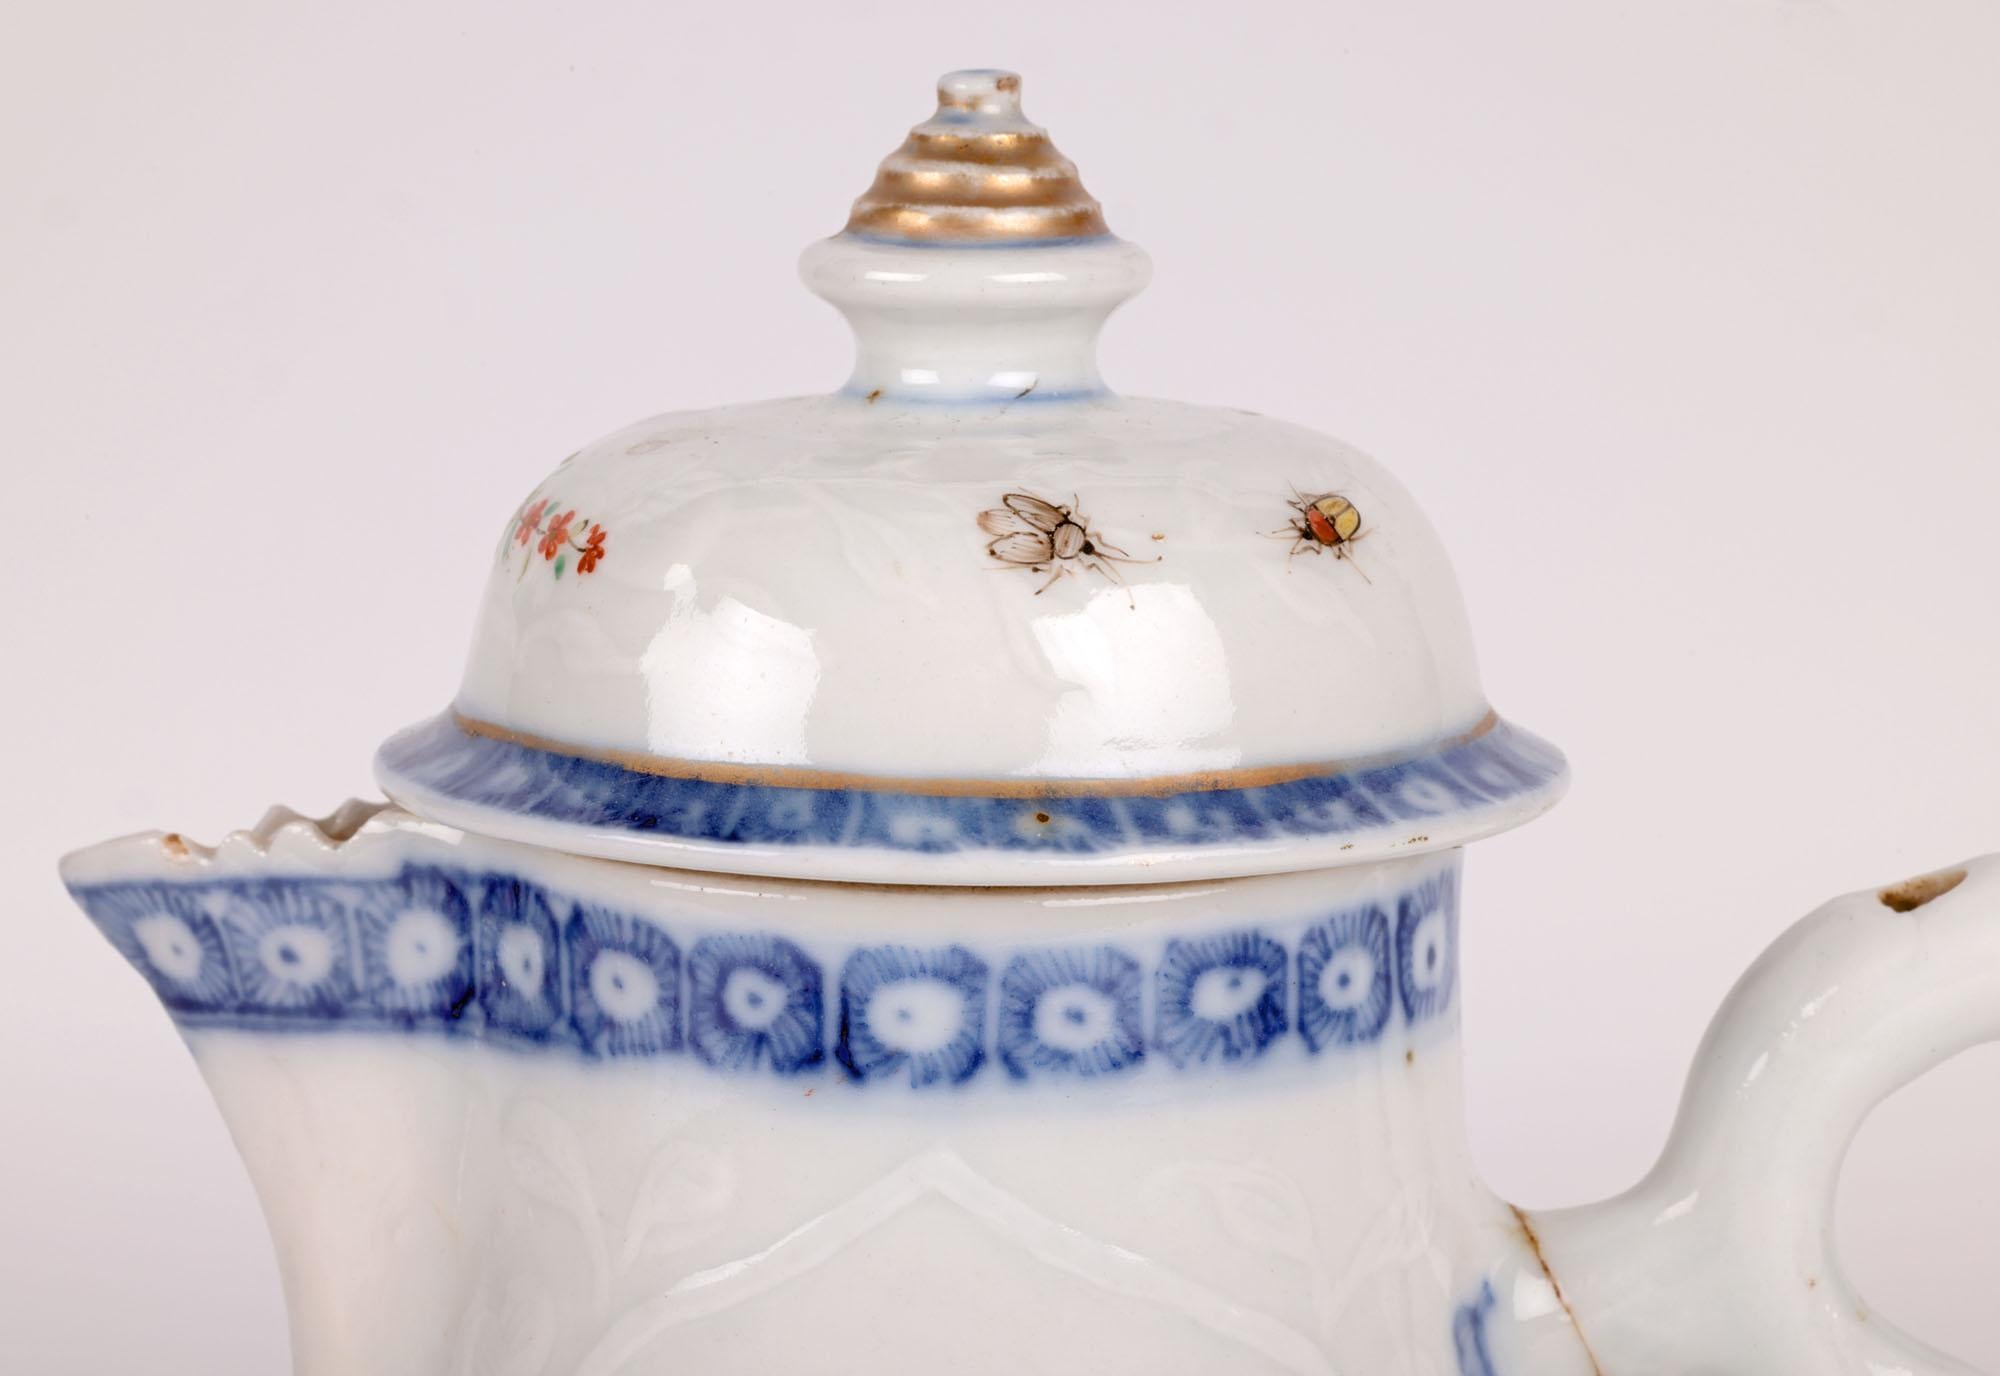 An unusual Chinese Kangxi period (1662-1722) porcelain lidded and handled jug embossed with flowers and hand painted in the European style. The jug stands raised on a narrow round foot rim with a round bulbous body and funnel shaped top with a bird